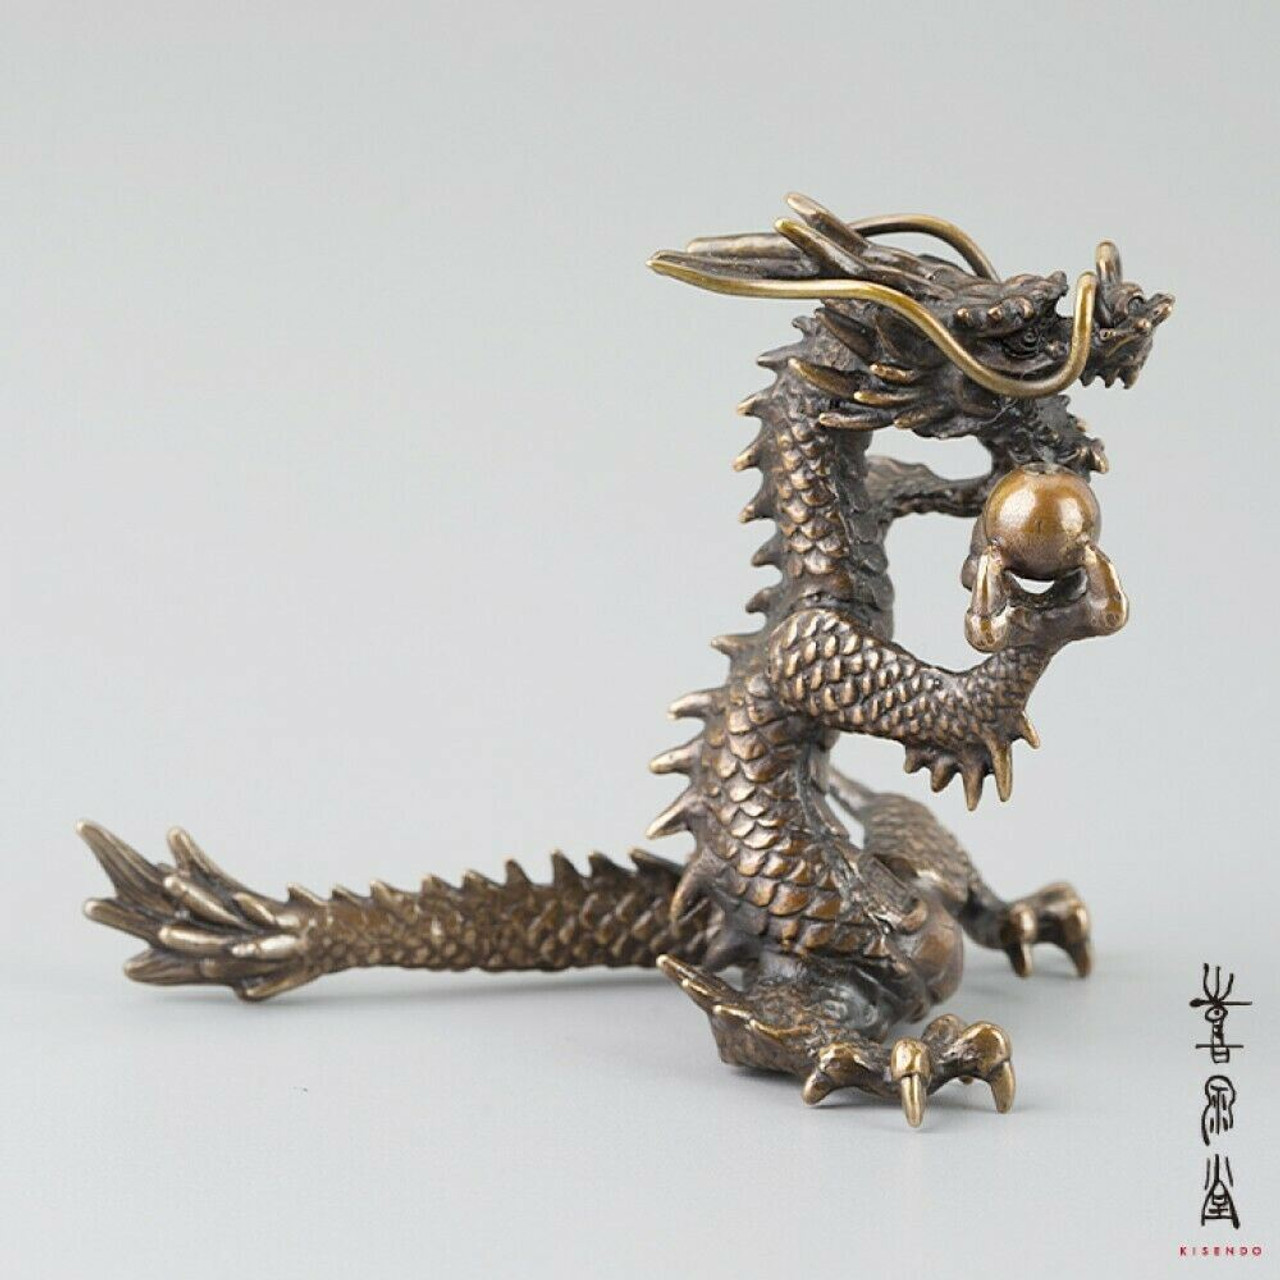 Dragon Statues For Good Luck and Wealth in 2023